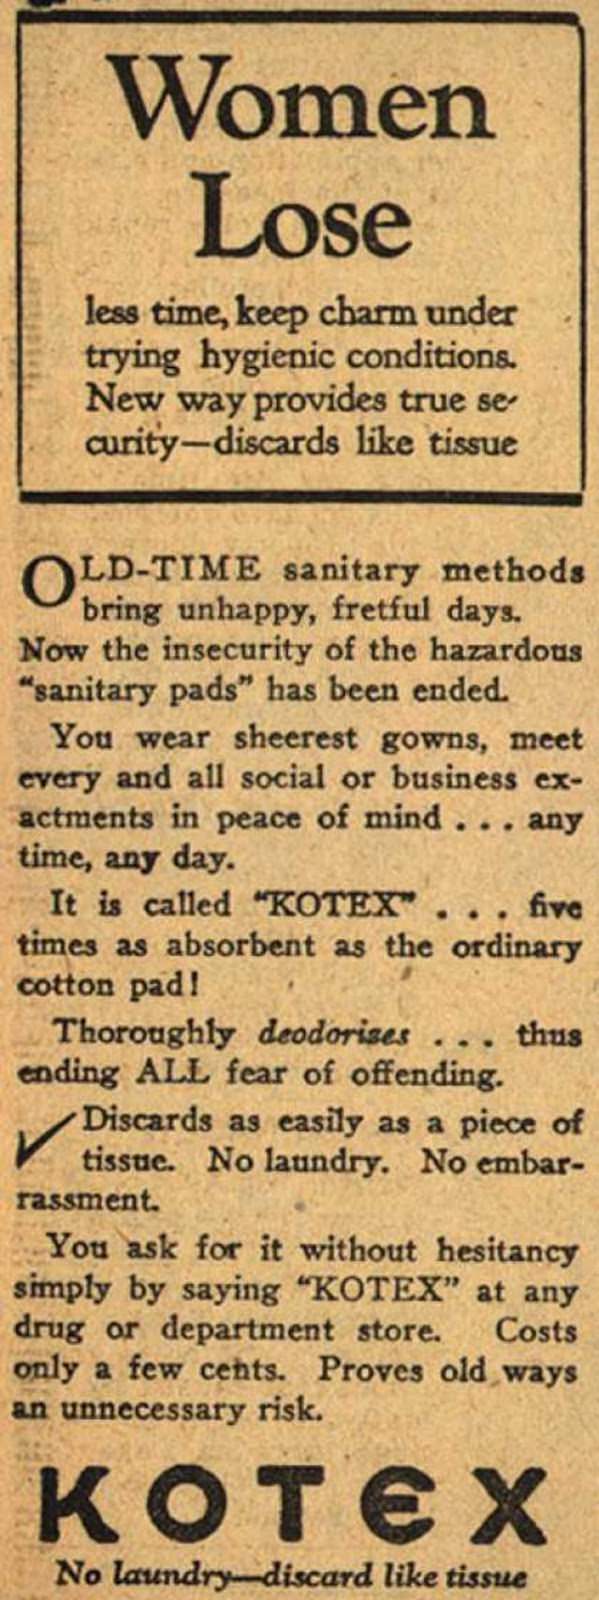 The Hilarious and Eye-Opening World of Early 20th-Century Feminine Hygiene Ads